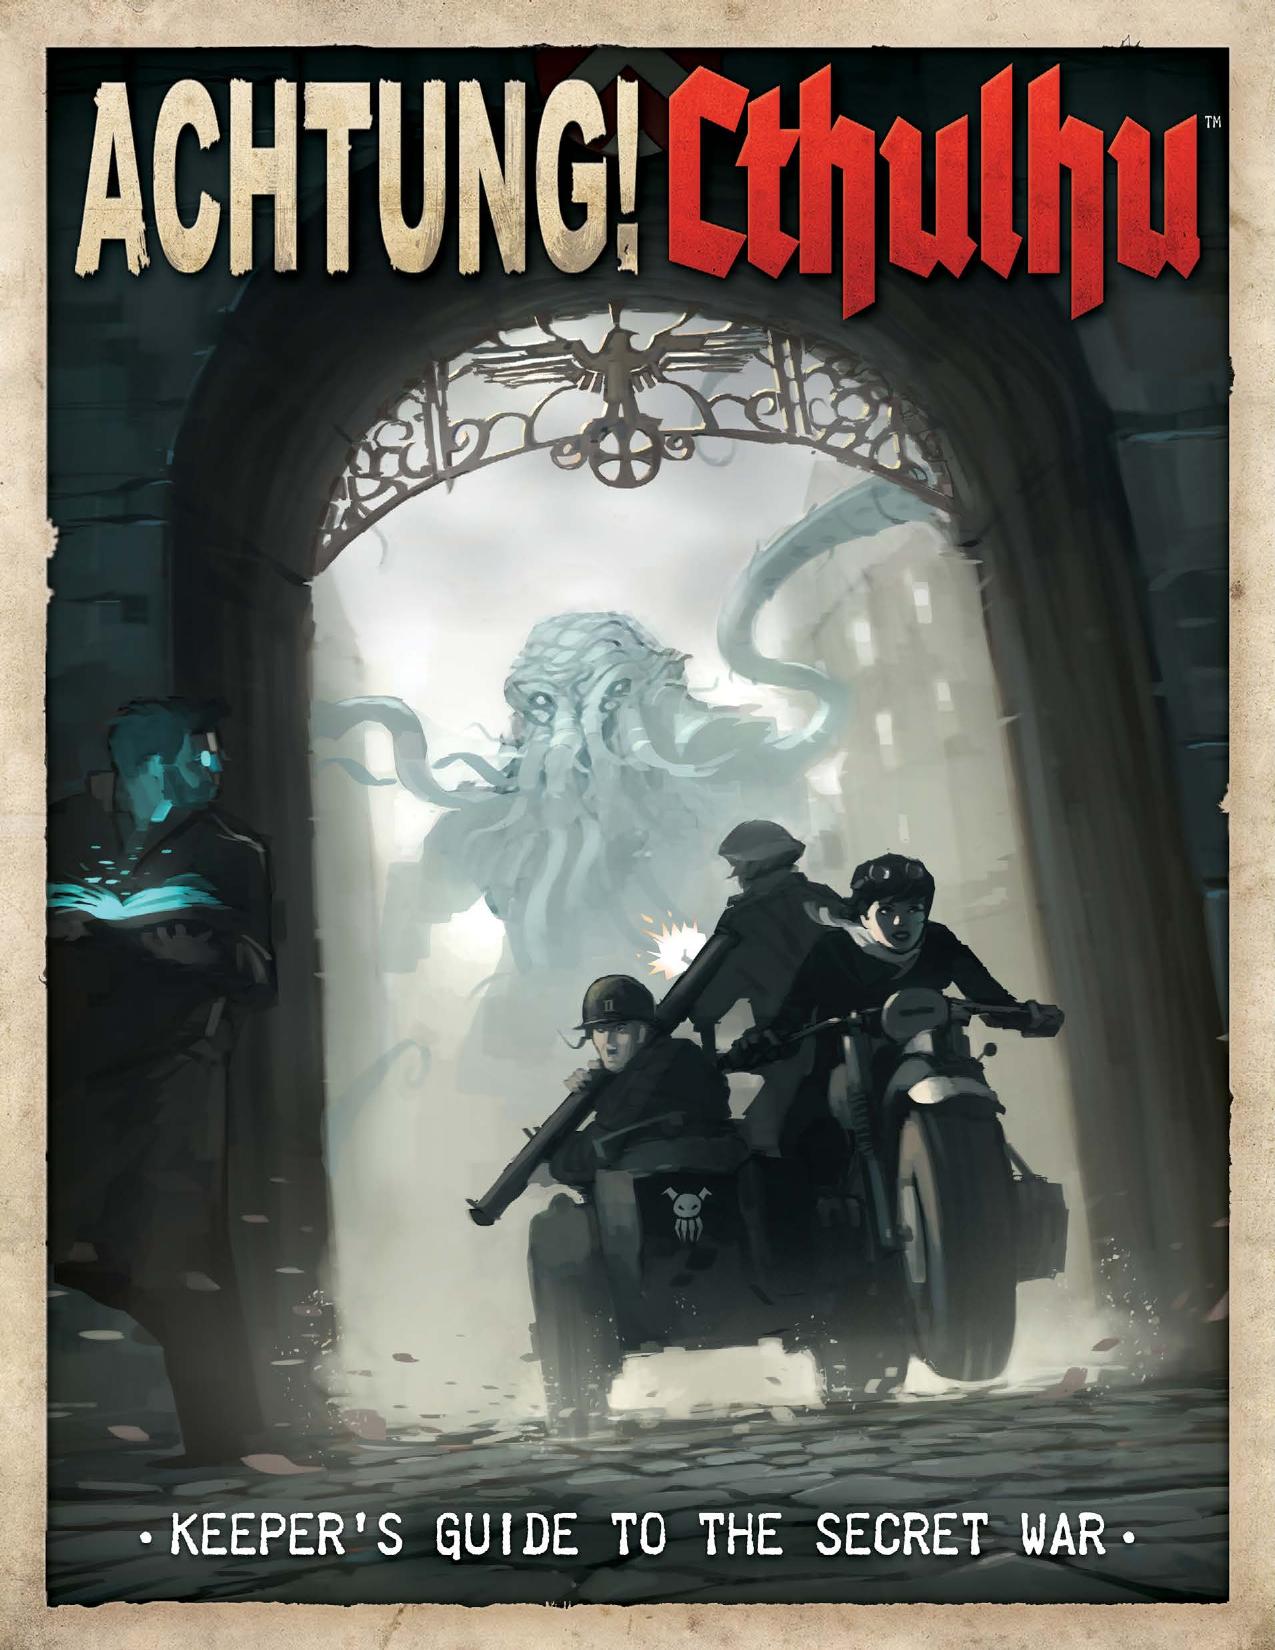 Achtung! Cthulhu: the Keeper's Guide to the Secret War